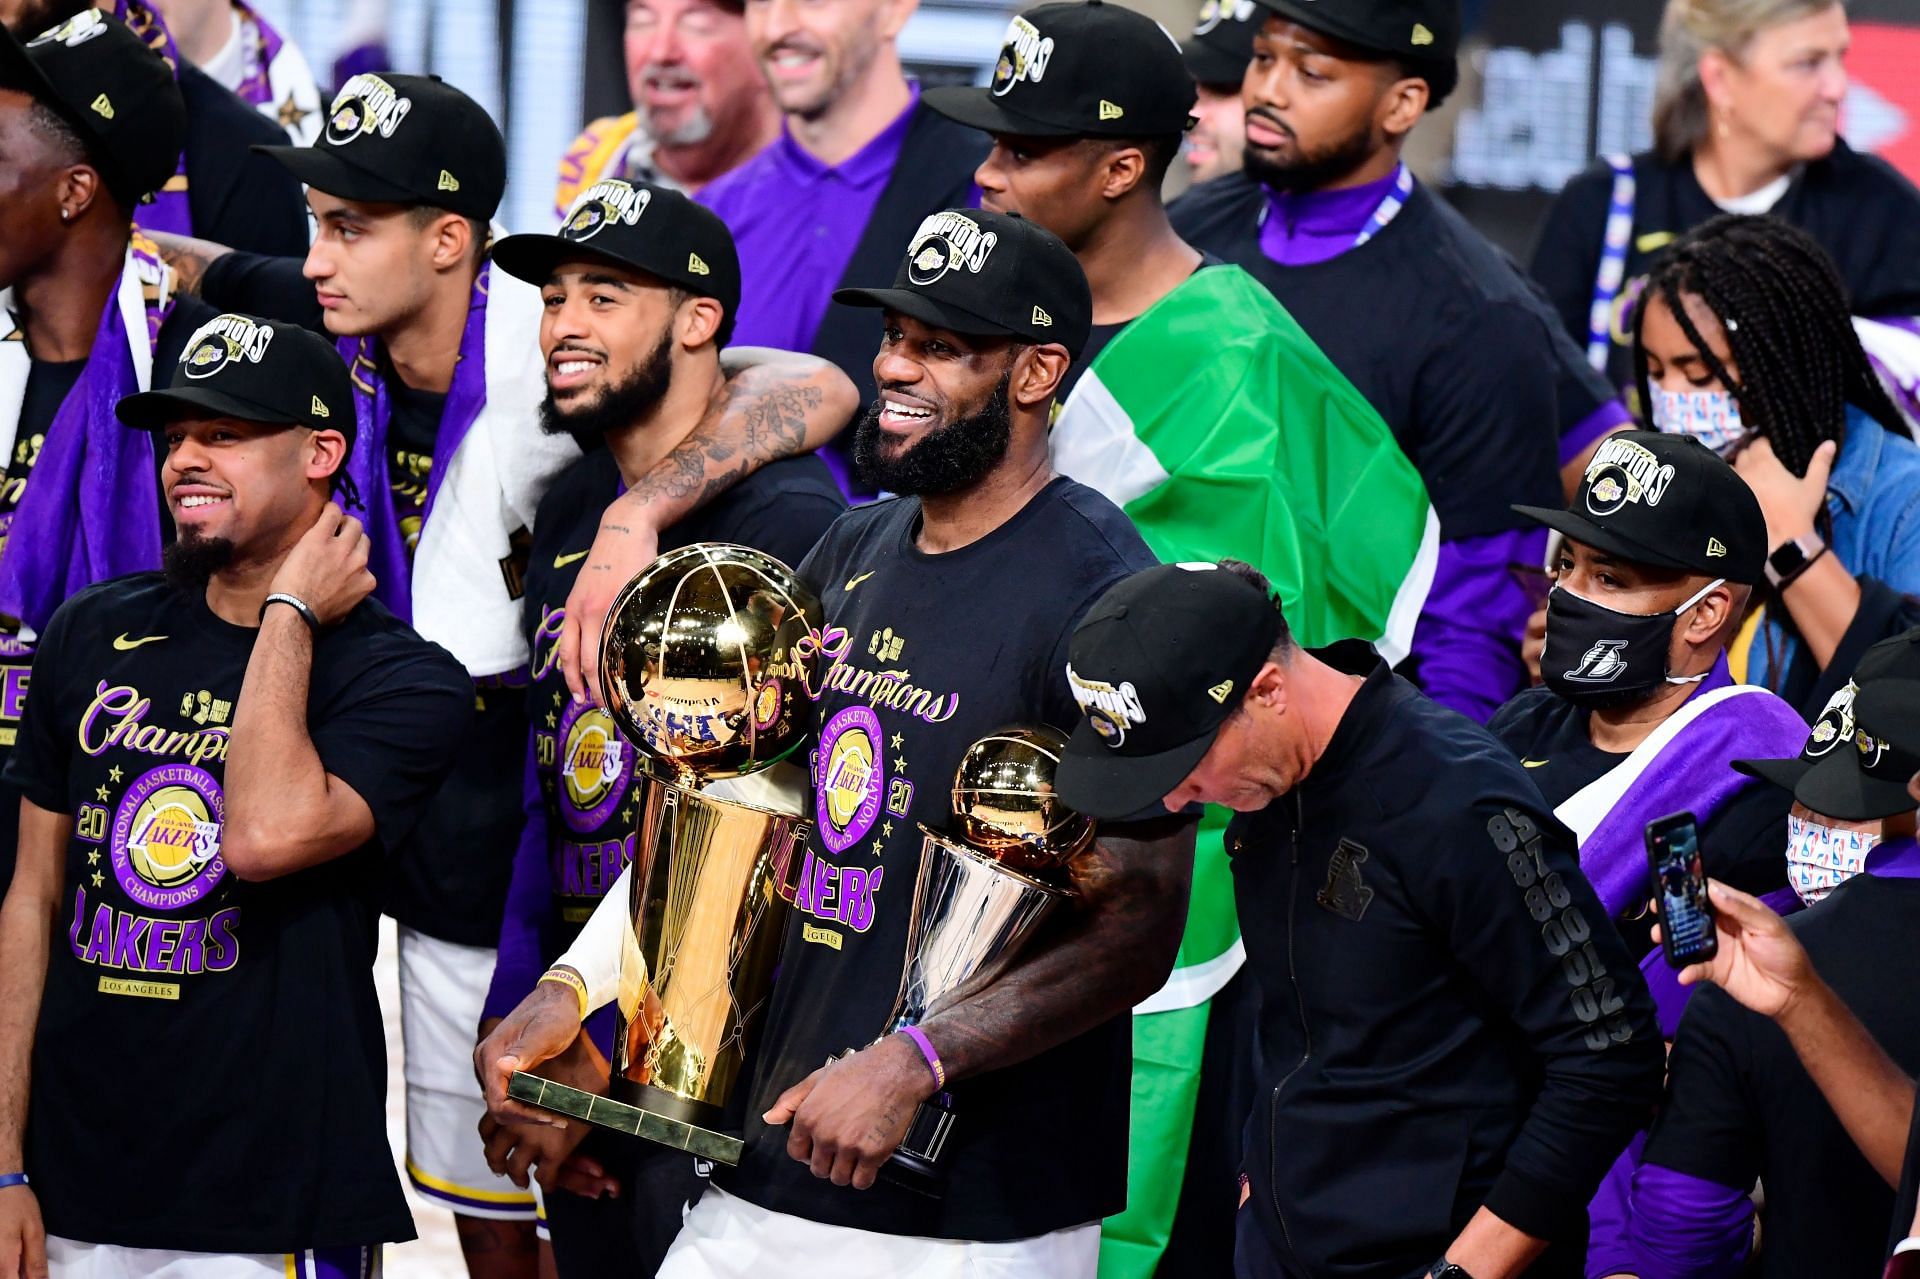 LeBron James won his fourth NBA championship with the LA Lakers in 2020.